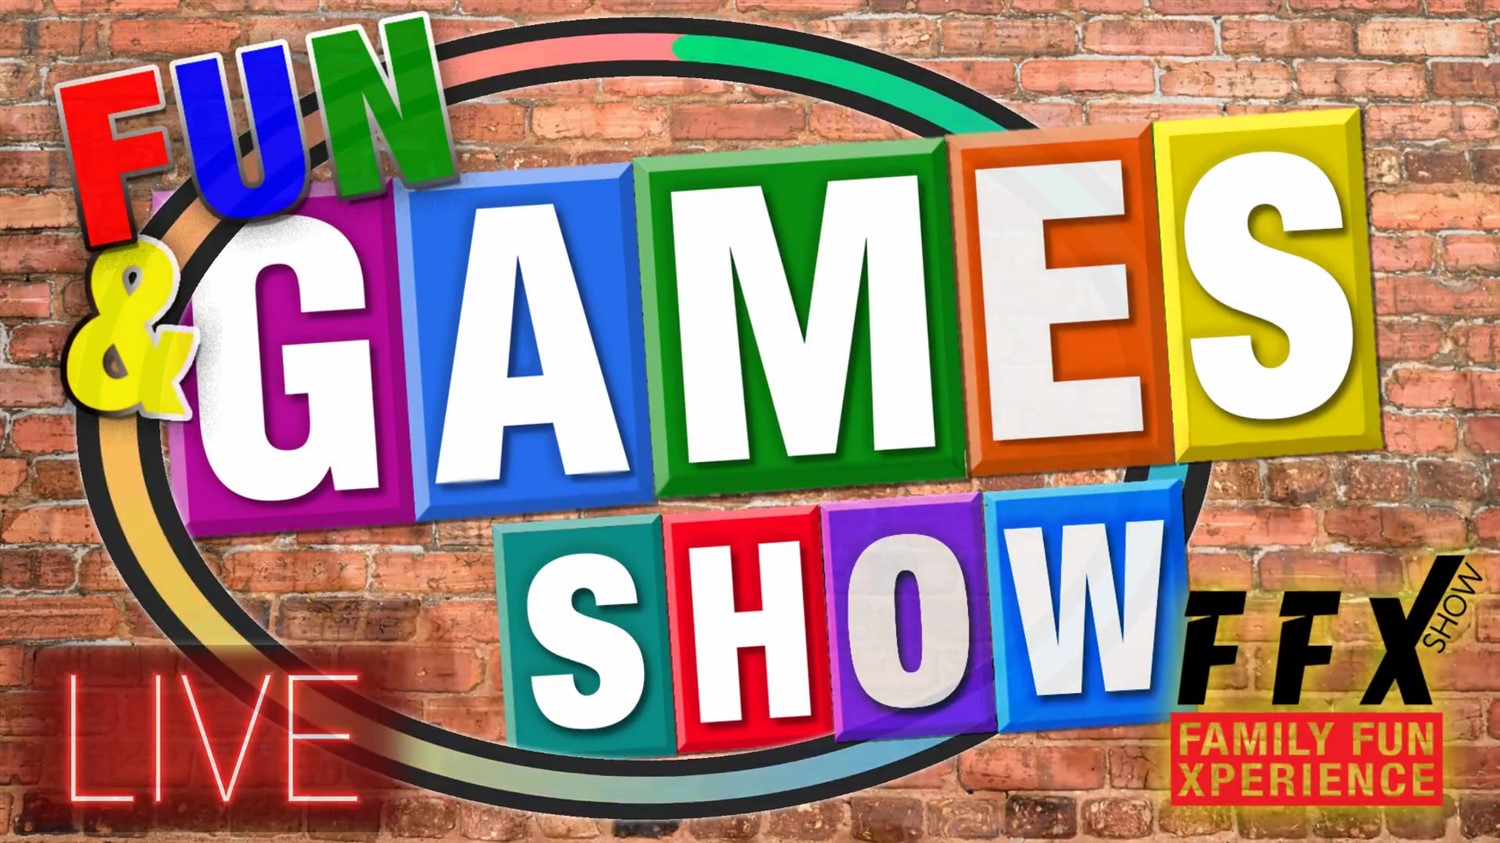 FUN & GAMES SHOW! 5 Star Fun for the whole family! on Aug 09, 19:00@FFX Theatre - Pick a seat, Buy tickets and Get information on Family Fun Xperience tickets.ffxshow.org